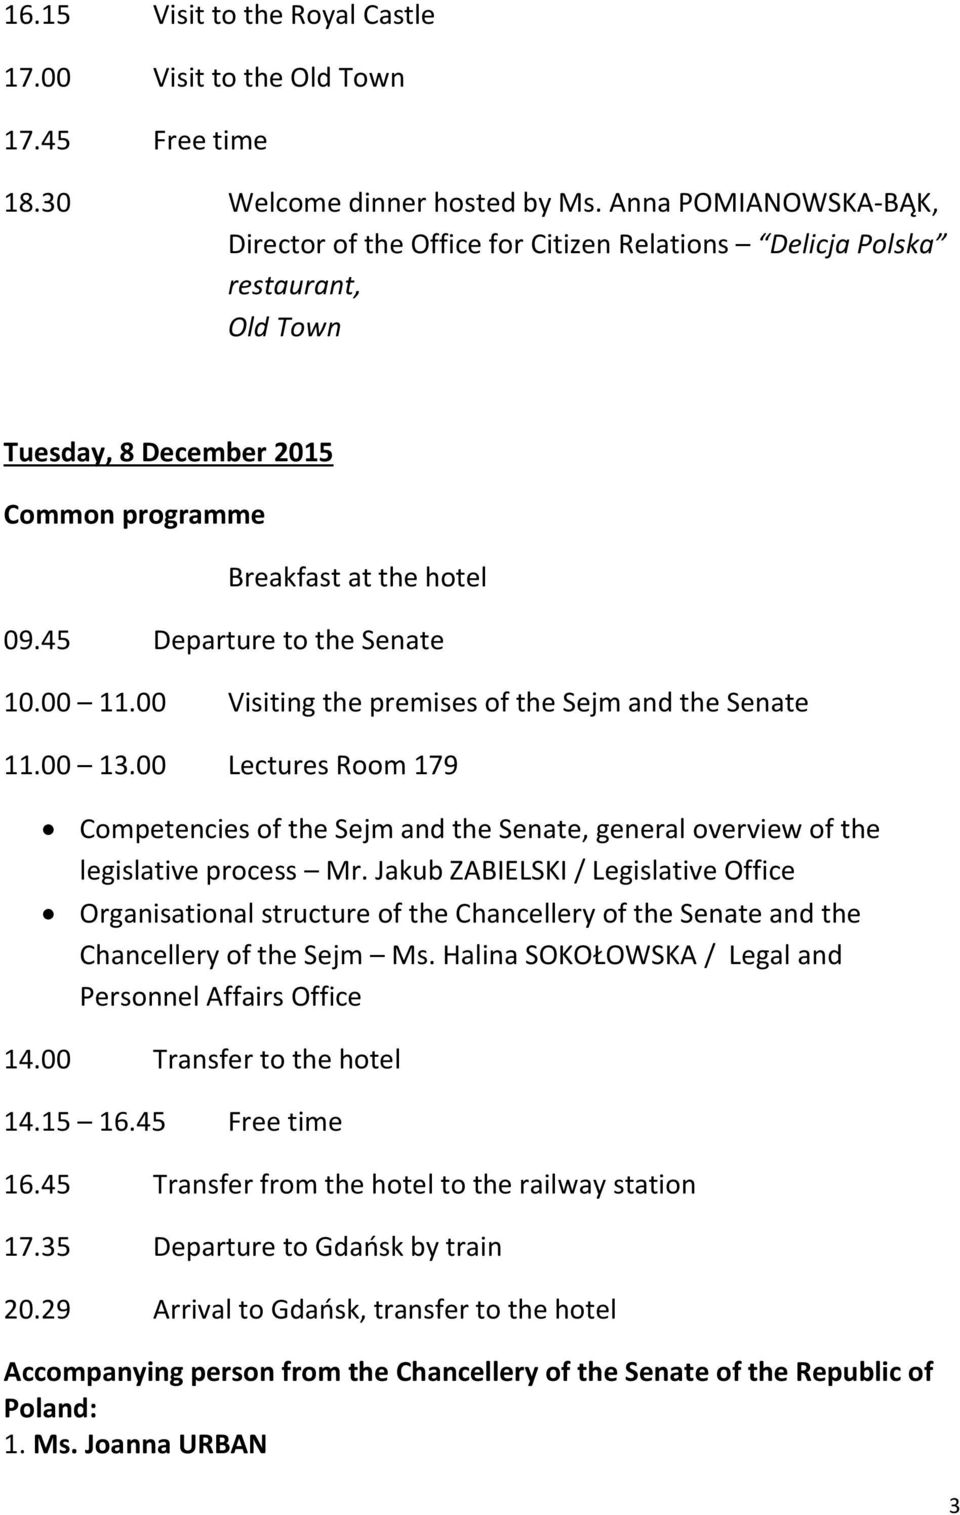 45 Departure to the Senate 10.00 11.00 Visiting the premises of the Sejm and the Senate 11.00 13.